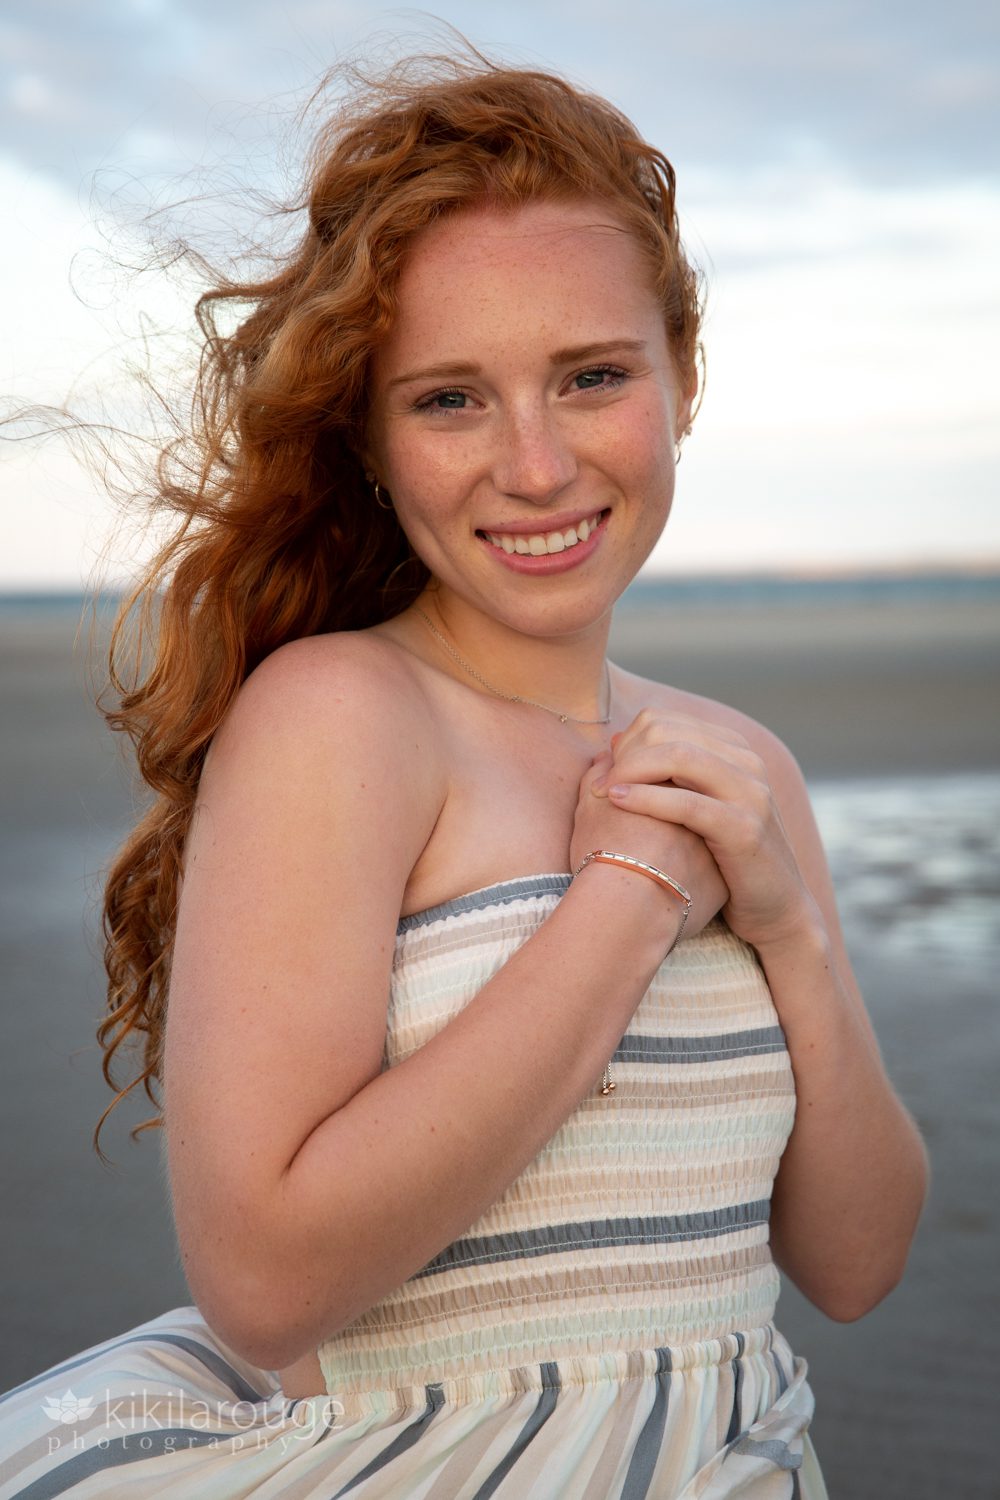 Portrait of a redhead with hands in heart on chest smiling at sunset